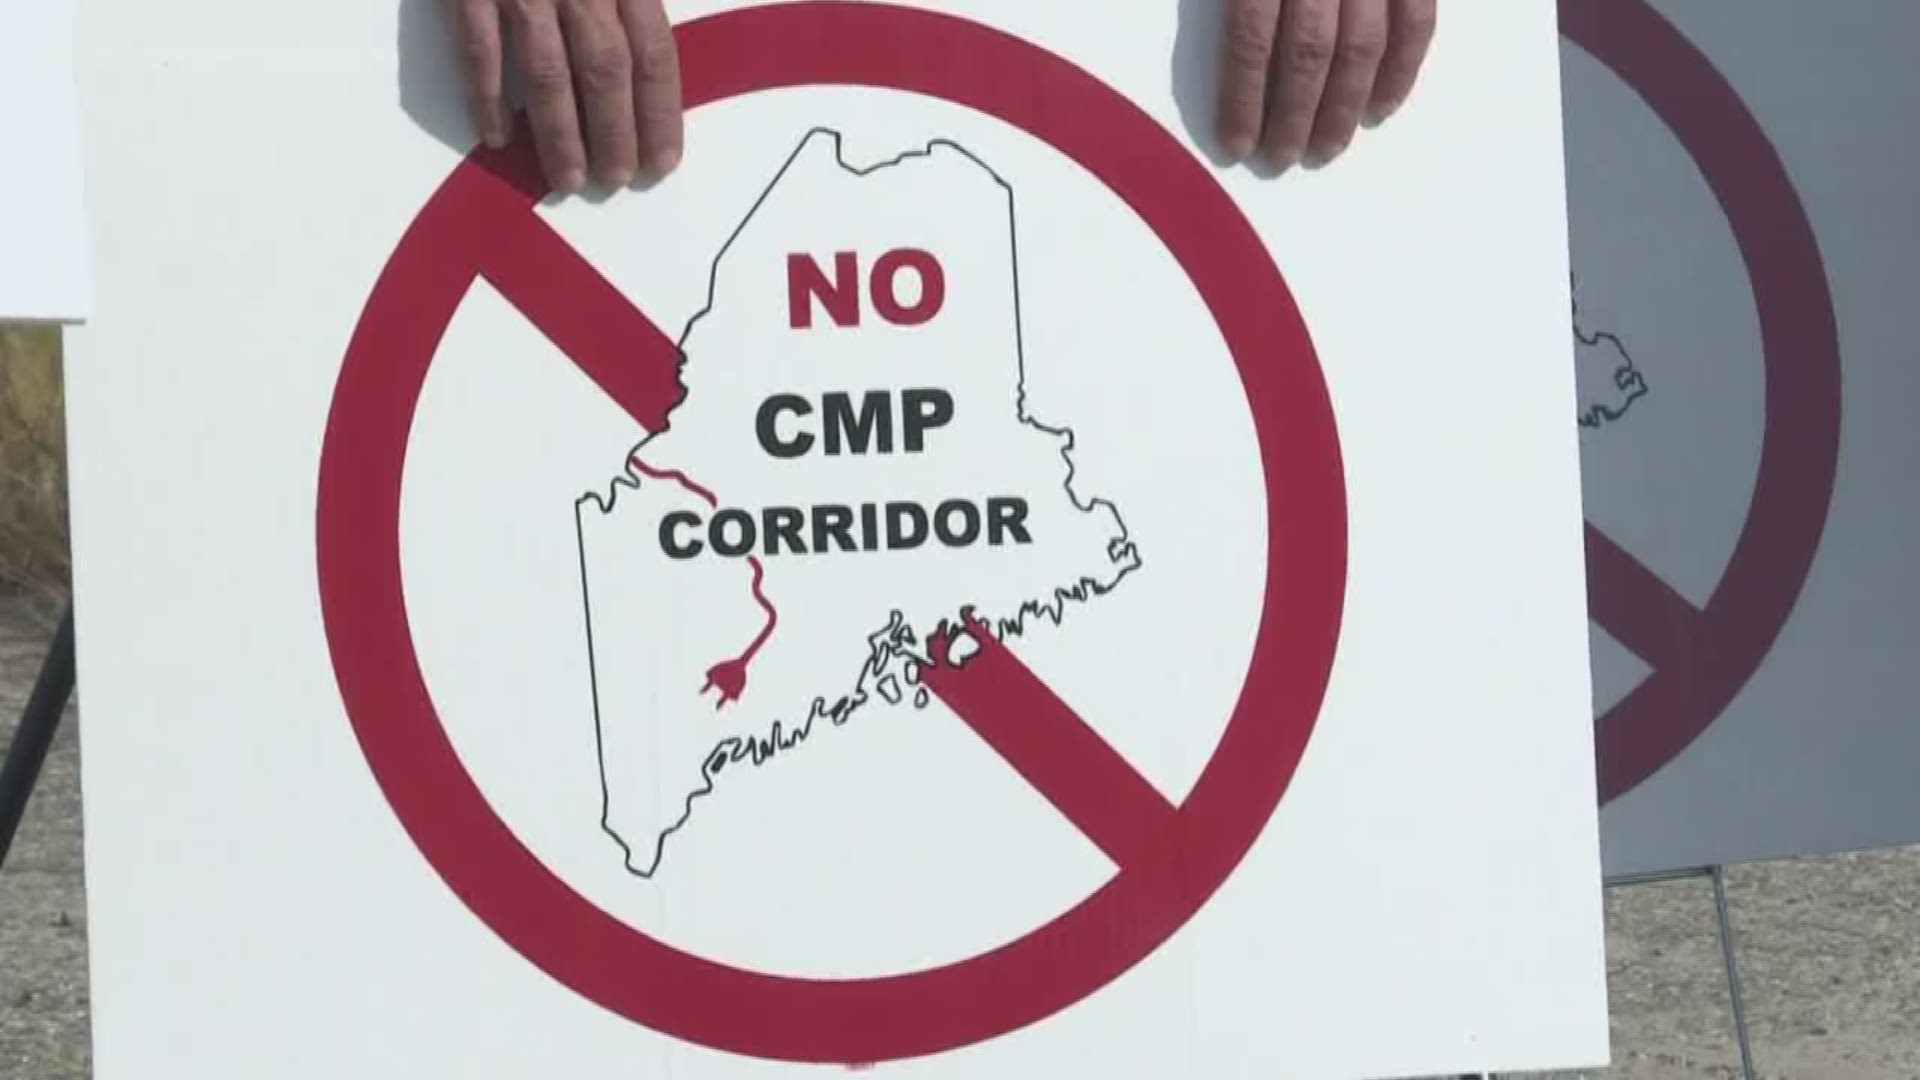 Congressman Jared Golden has asked the U.S. Army Corps of Engineers to host public hearings on Central Maine Power's planned transmission line.